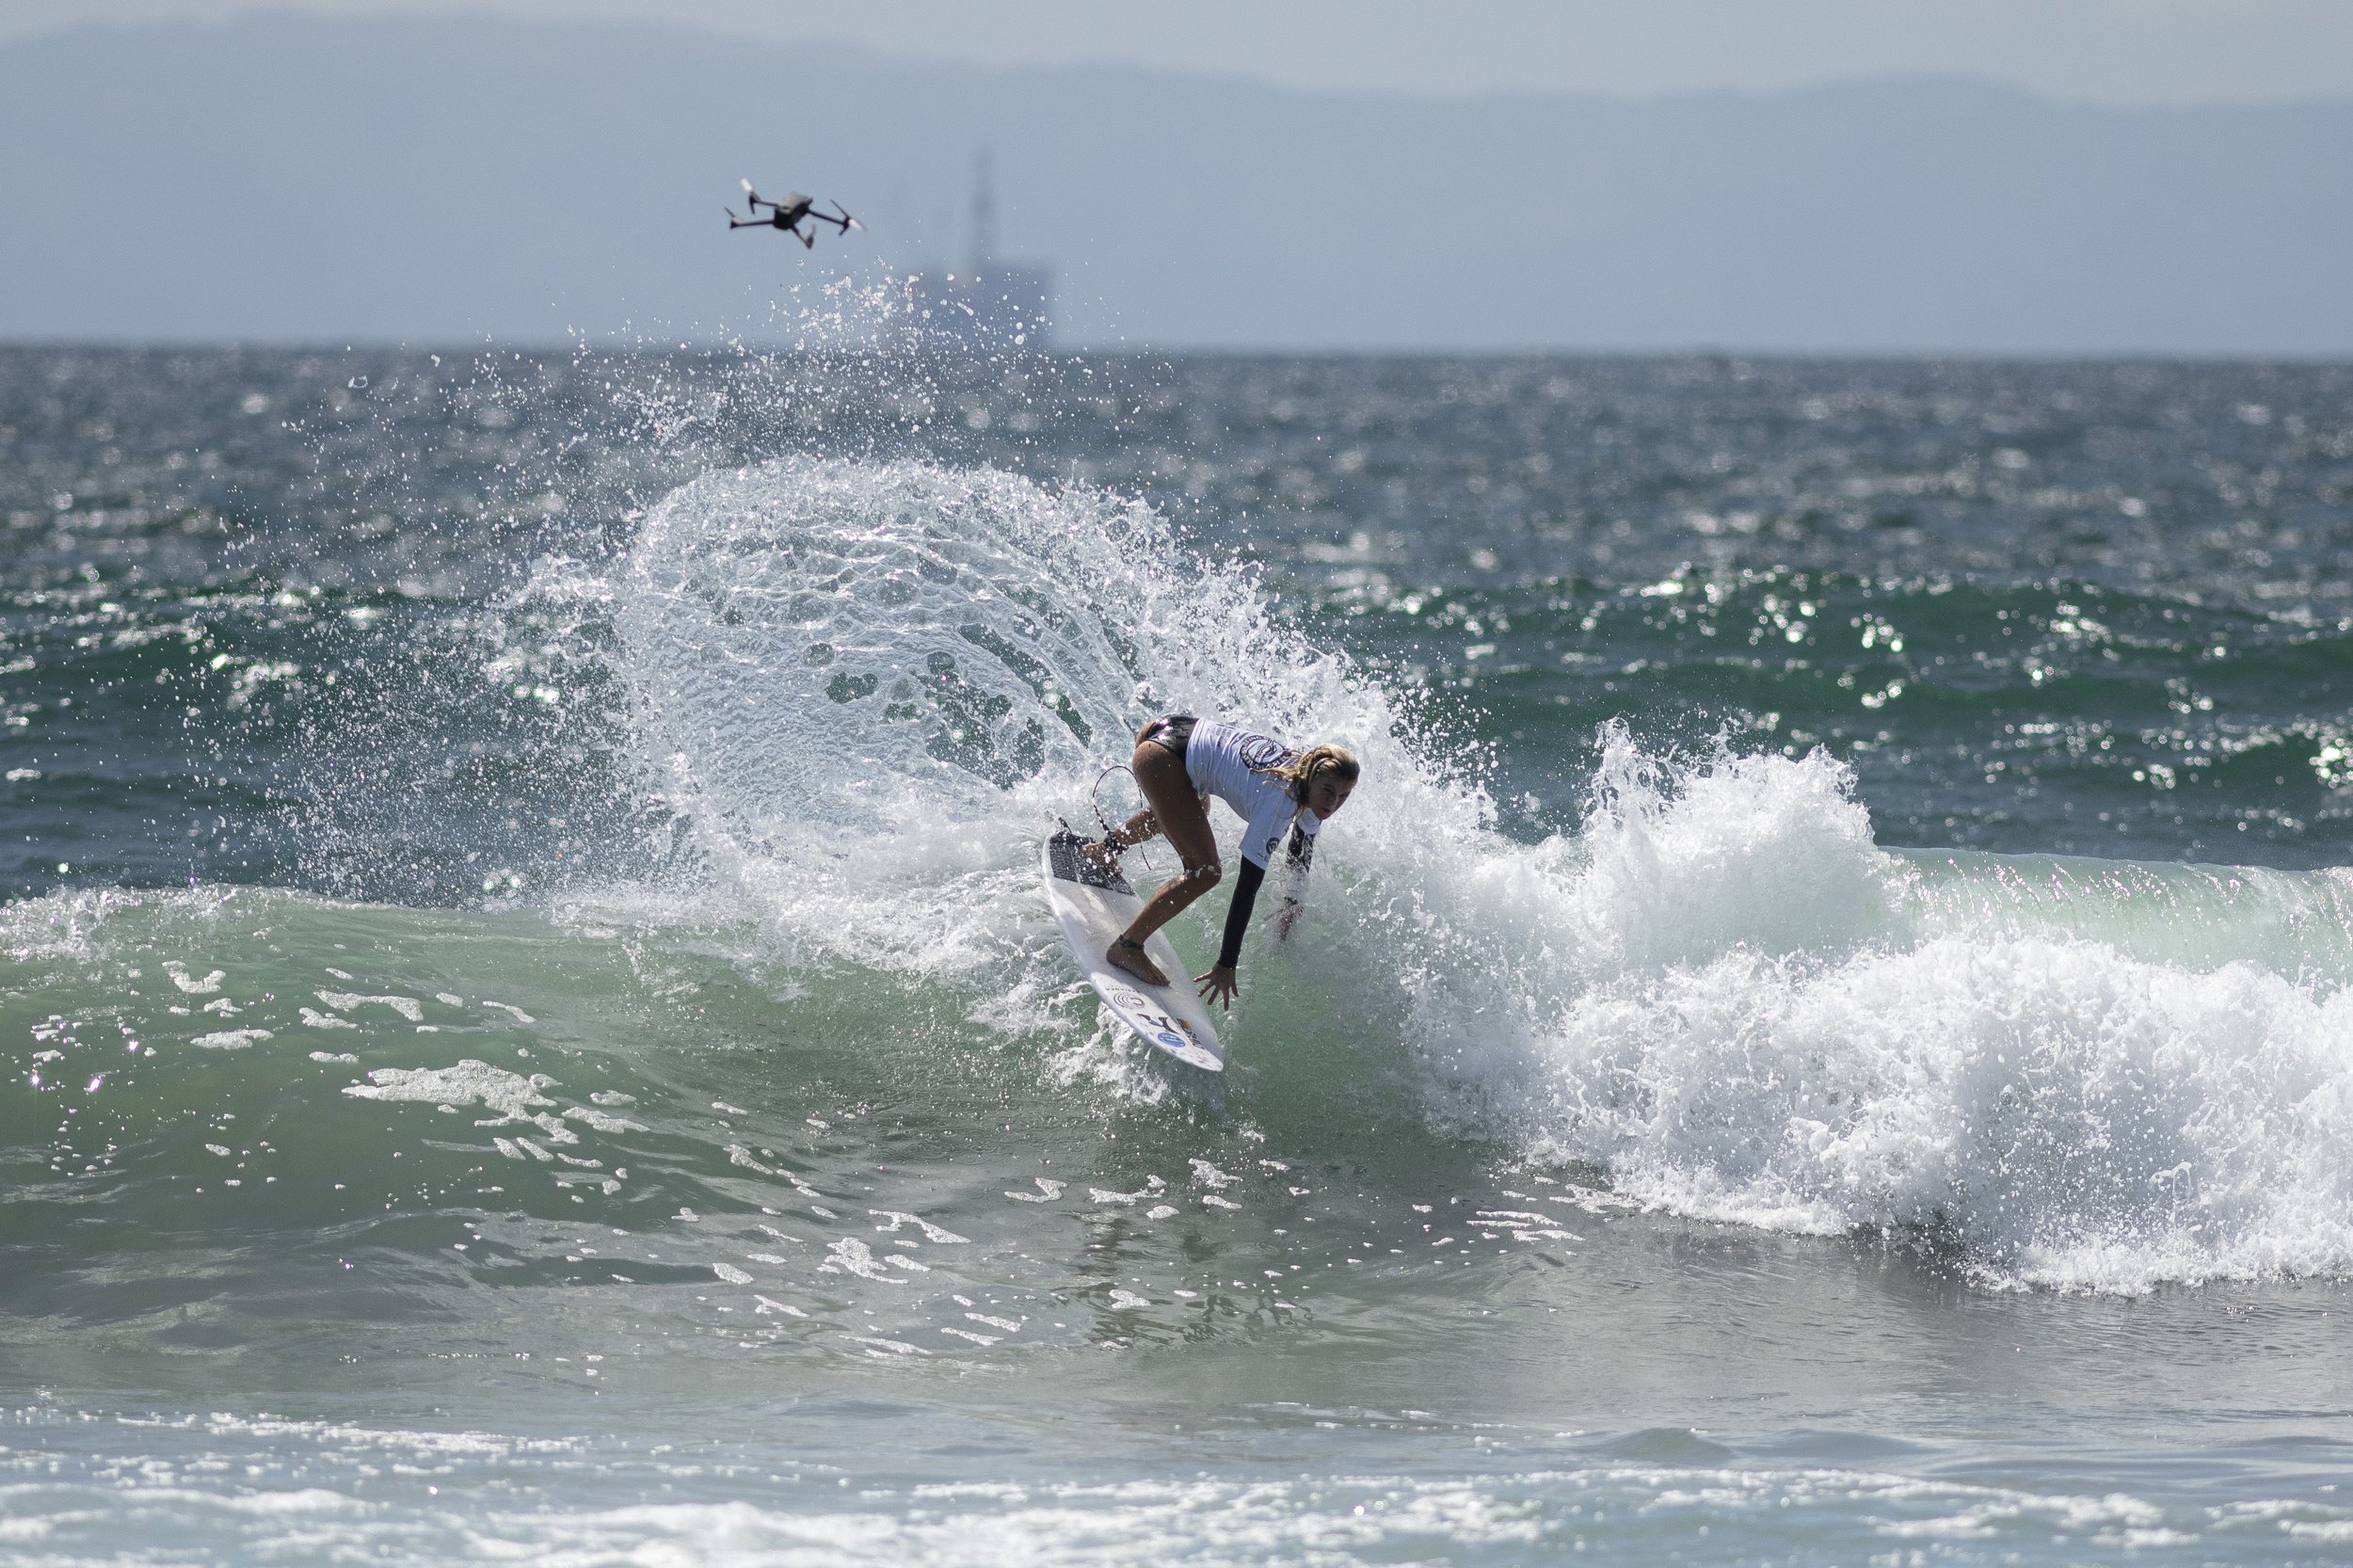  Tessa Thyssen a surfer from France rides her first wave of qualifications. (Jon Putman | The Corsair) 